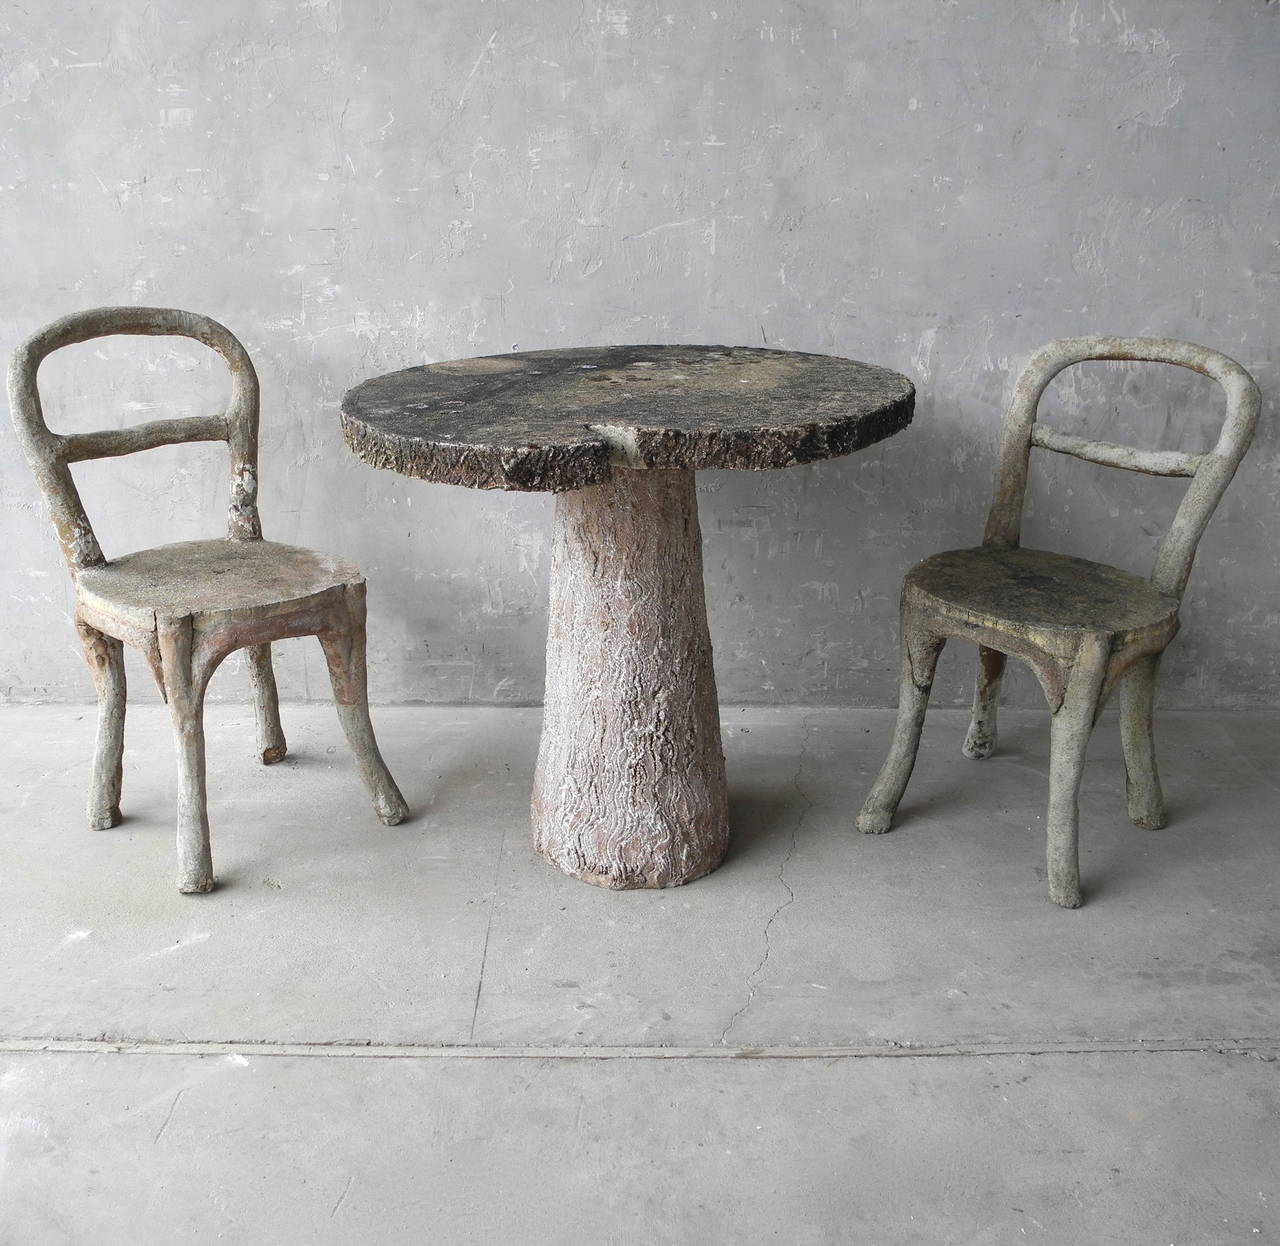 This antique faux bois garden set includes two small chairs and one table. Literally translating to 